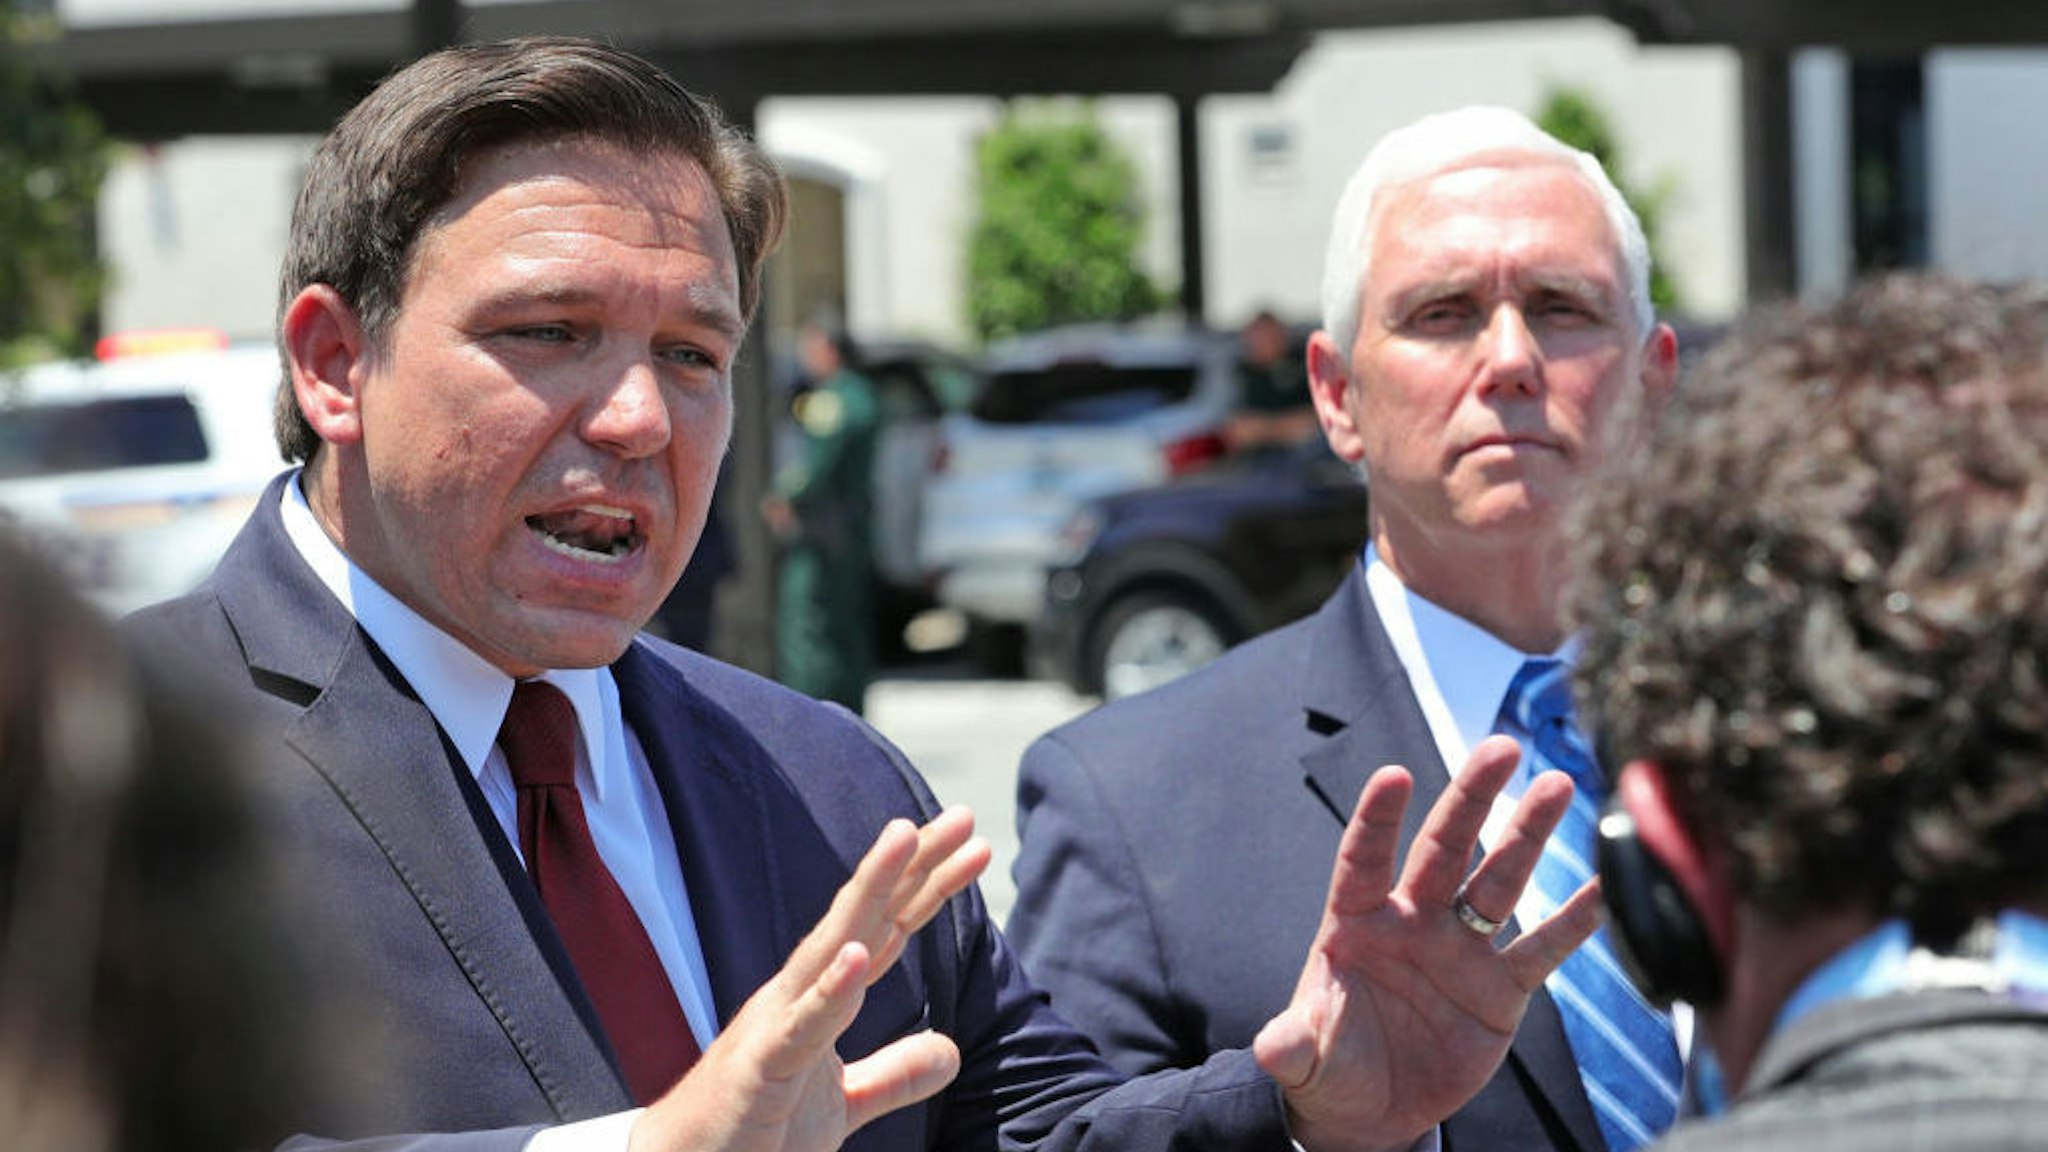 Florida governor Ron DeSantis answers reporters questions with Vice President Mike Pence at the Westminster Baldwin Park retirement community, in Orlando, Fla., Wednesday, May 20, 2020. Pence and DeSantis visited the facility to assist in delivering PPE supplies in response to the coronavirus crisis. (Joe Burbank/Orlando Sentinel/TNS)